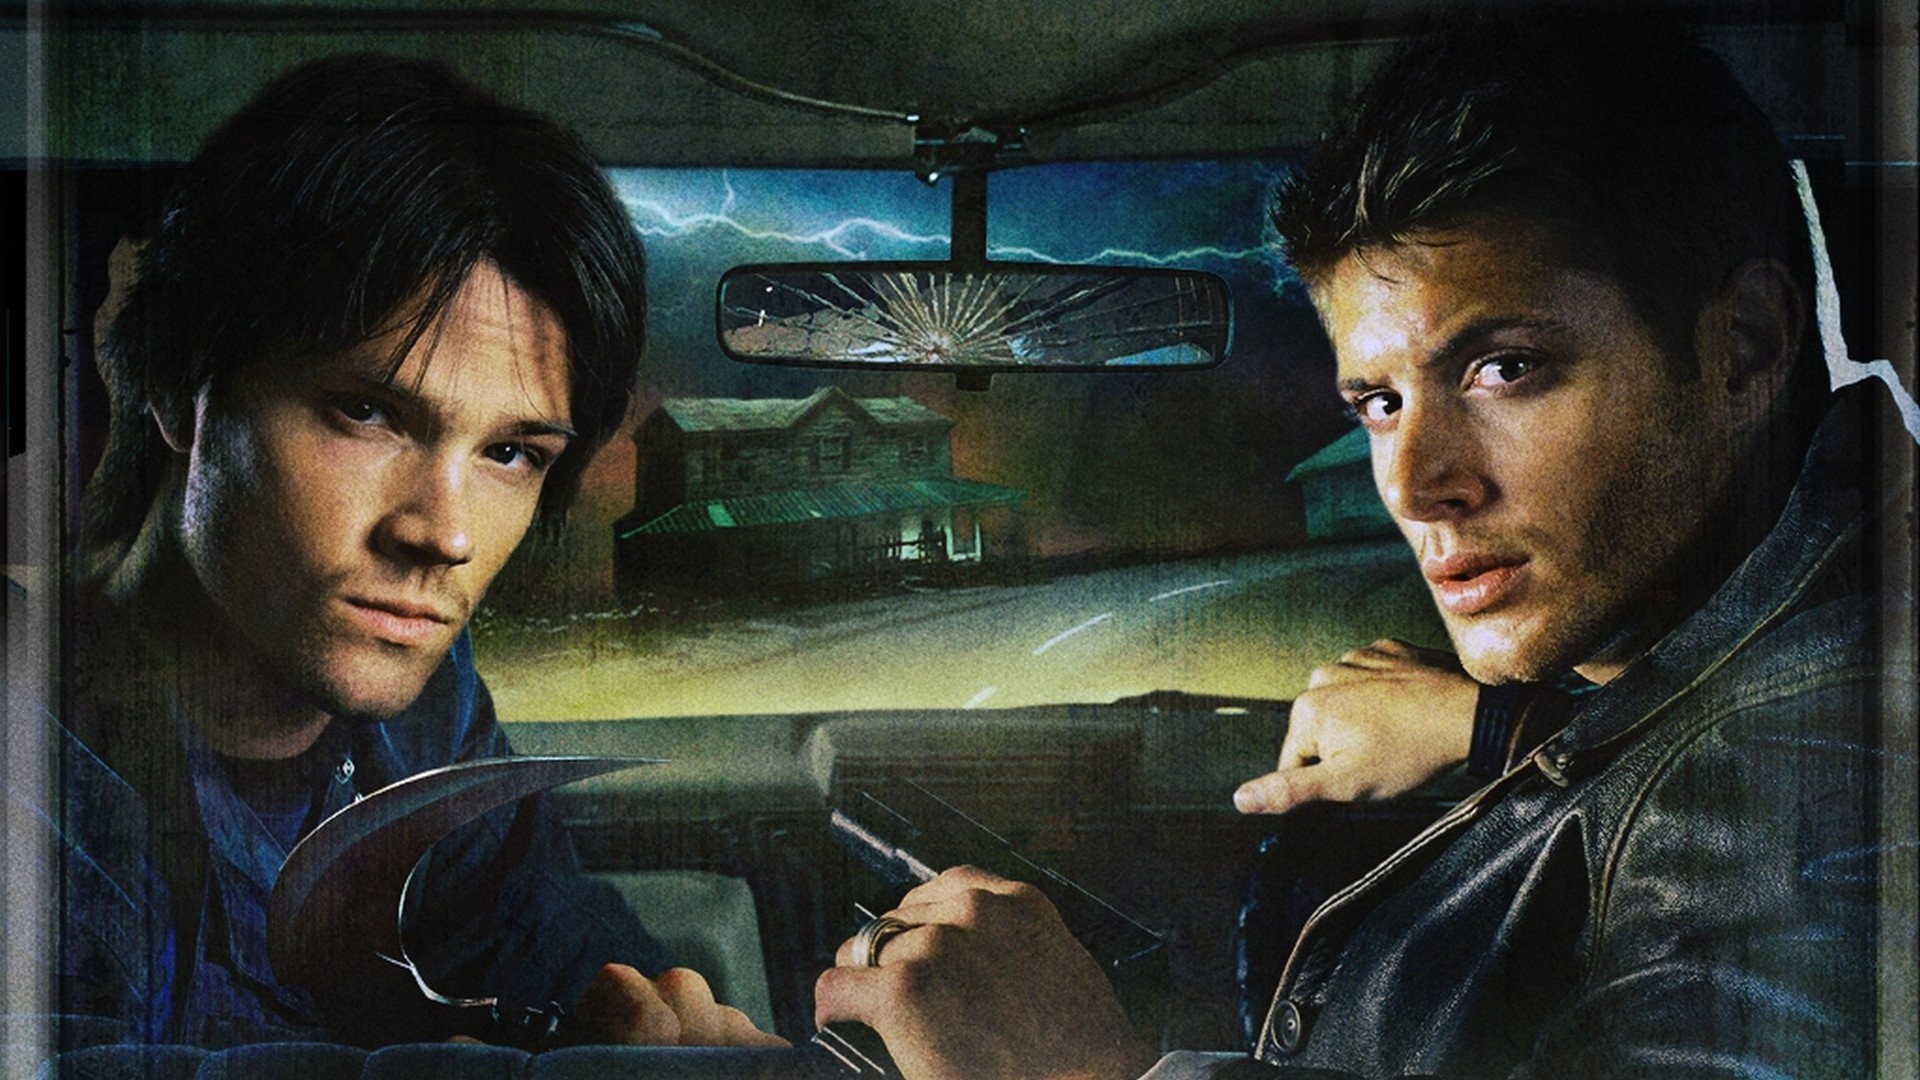 1920x1080 Supernatural Wallpaper HD Wallpapers Backgrounds of Your Choice 